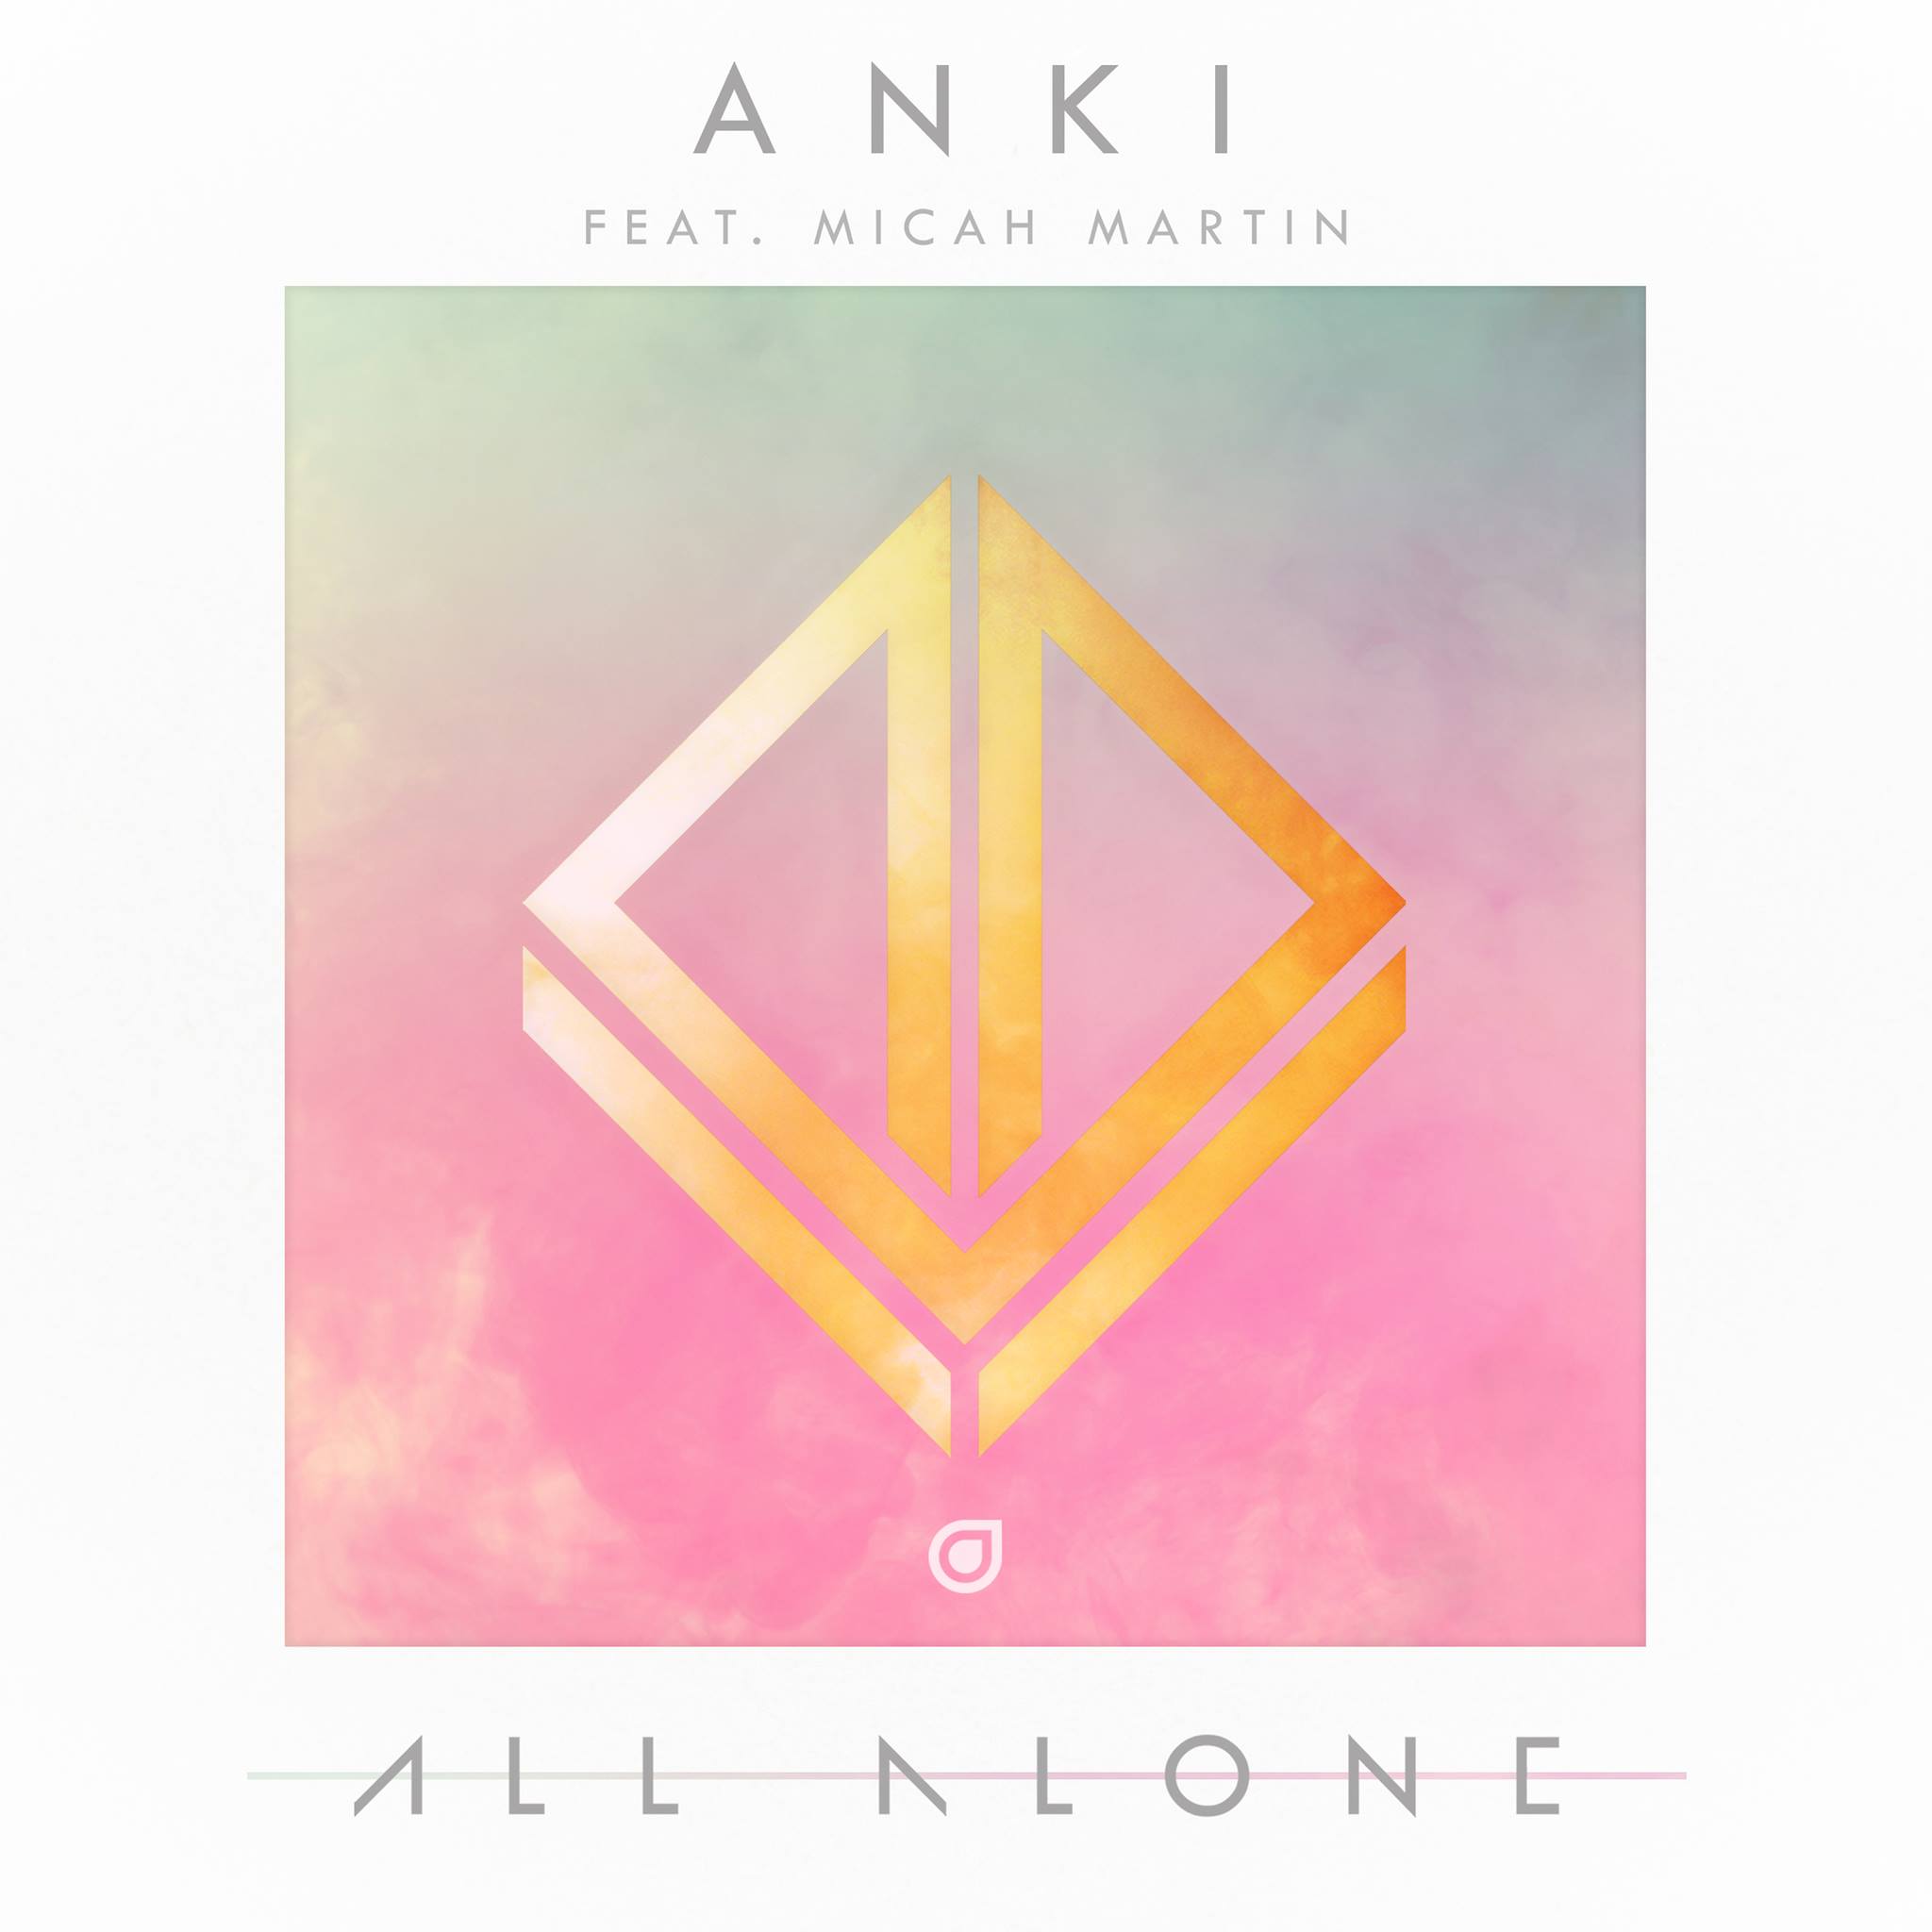 Anki Teams Up With Enhanced for “All Alone”